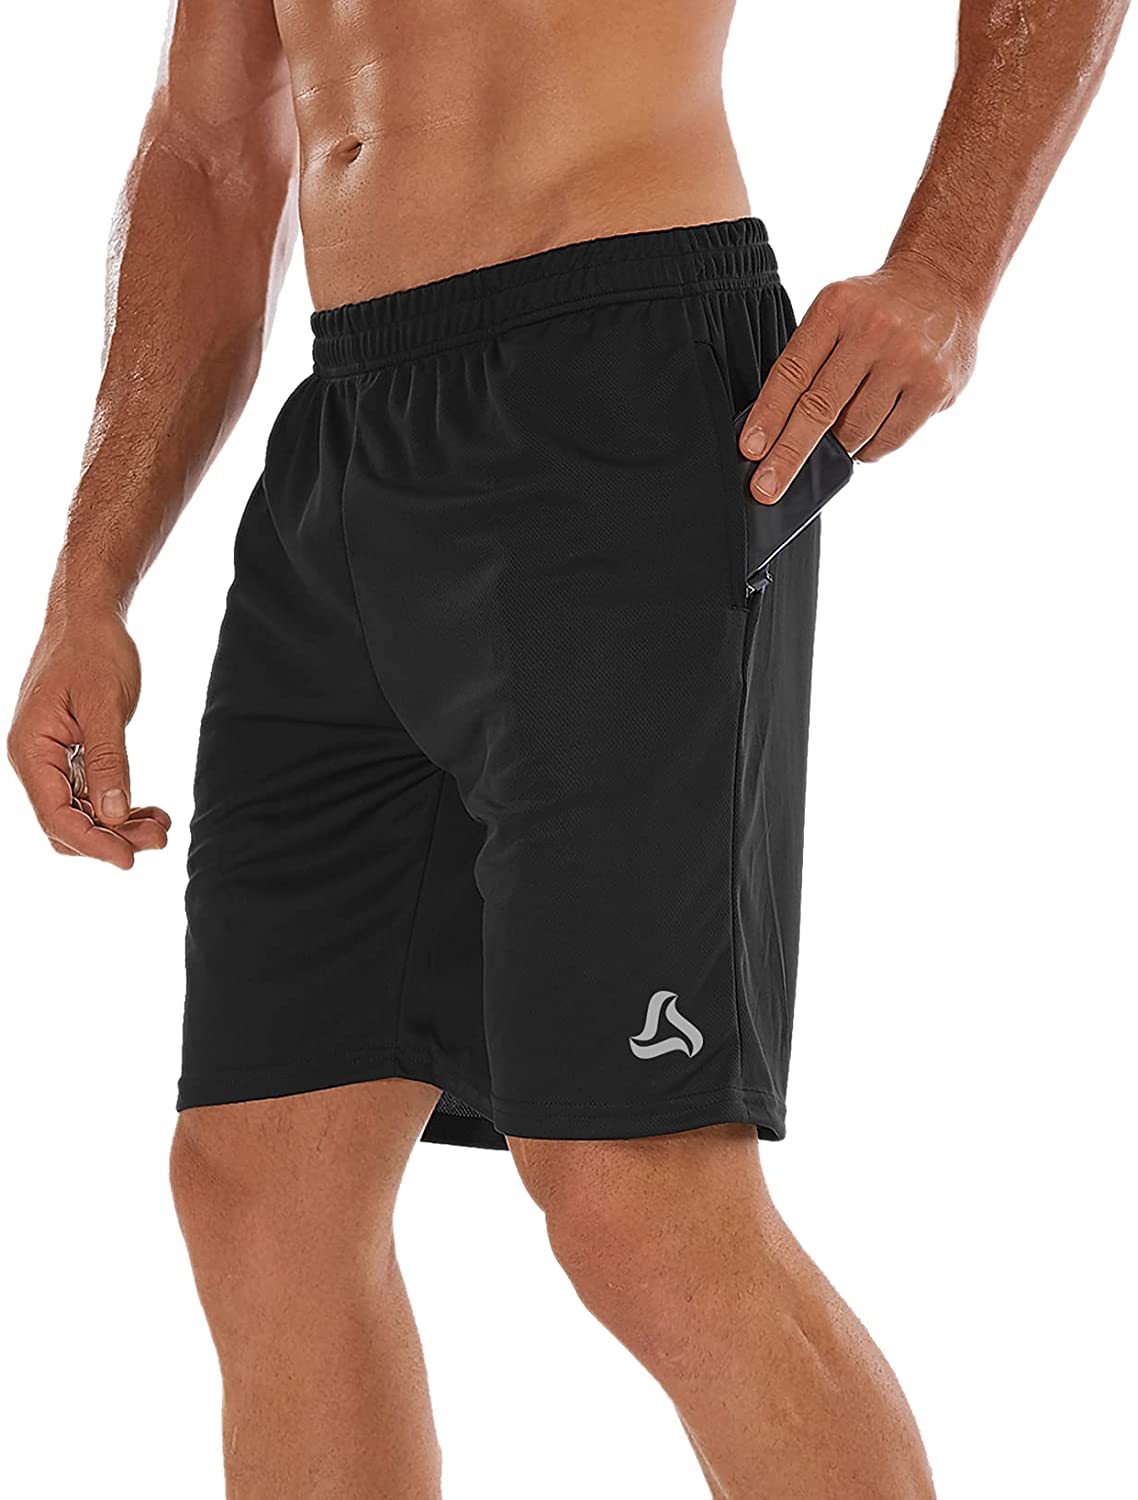 SILKWORLD Men's 7 Running Athletic Shorts Lightweight Mesh Gym Workout Shorts with Zip Pockets Pack of 1,2,3 